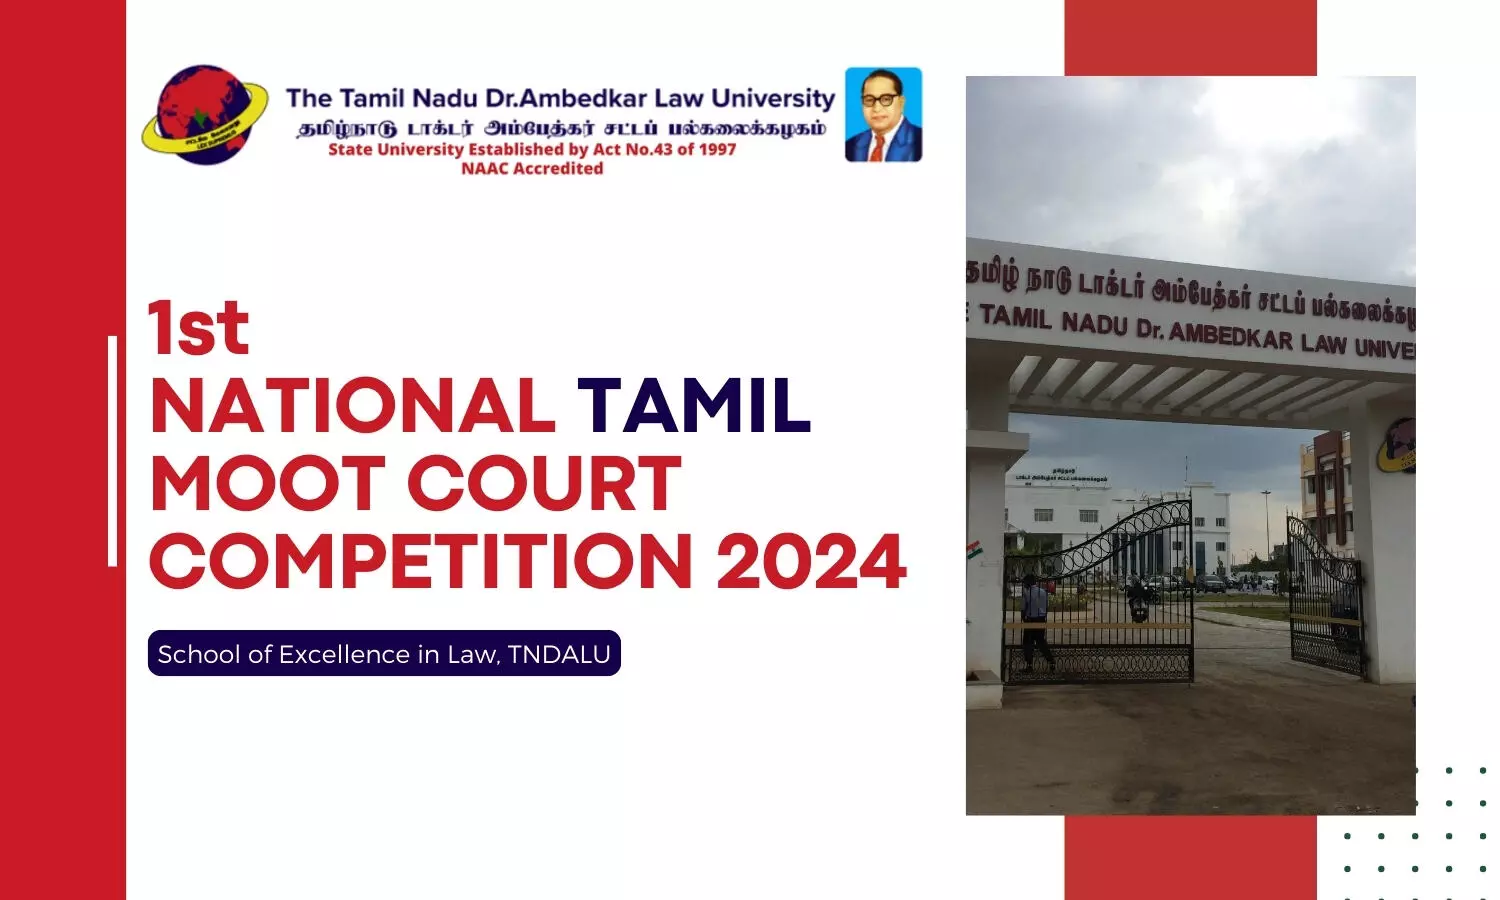 1st National Tamil Moot Court Competition 2024 | TNDALU